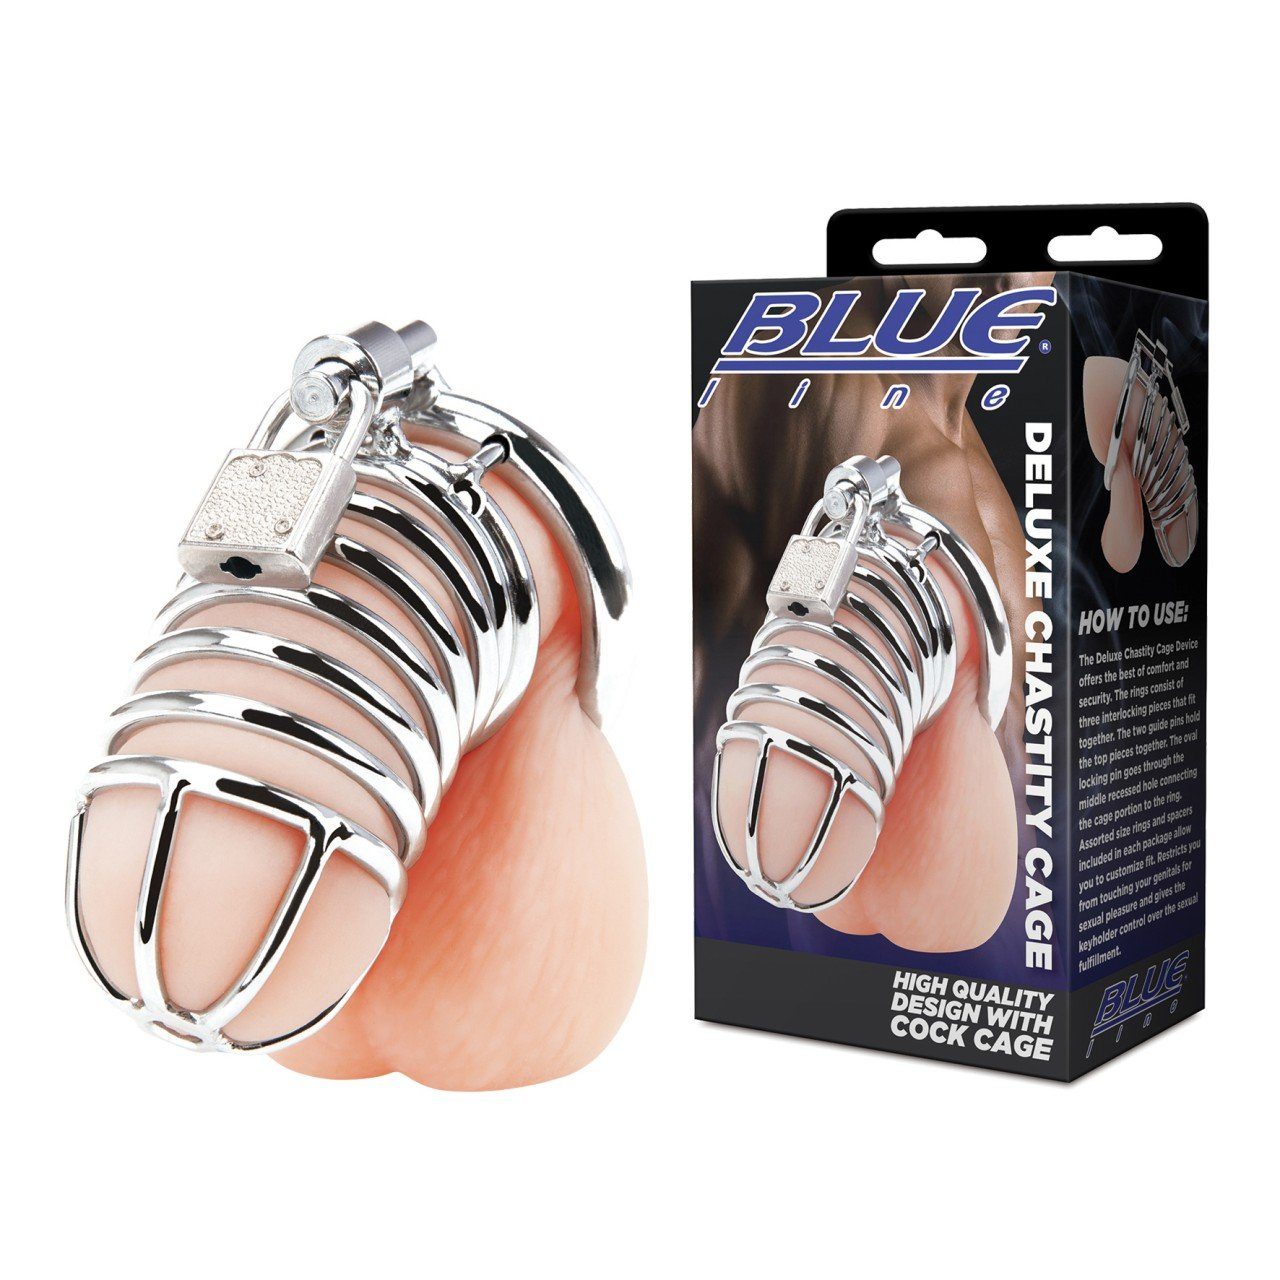 Blue Line Peniskäfig BLUE LINE C&B GEAR Deluxe Chastity Cage